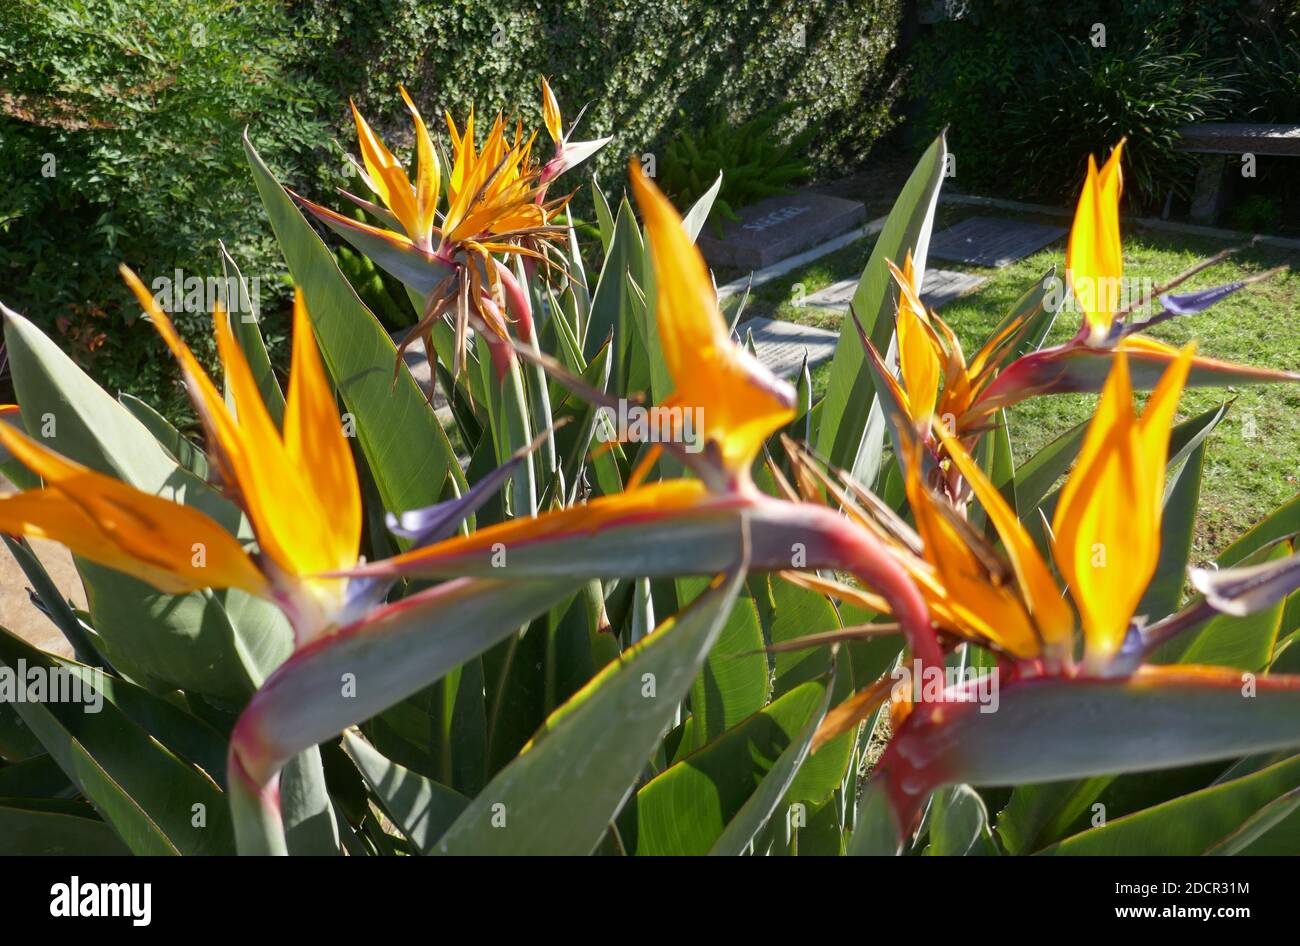 Los Angeles, California, USA 17th November 2020 A general view of atmosphere of Birds of Paradise at Mount Sinai Cemetery Hollywood Hills on November 17, 2020 in Los Angeles, California, USA. Photo by Barry King/Alamy Stock Photo Stock Photo